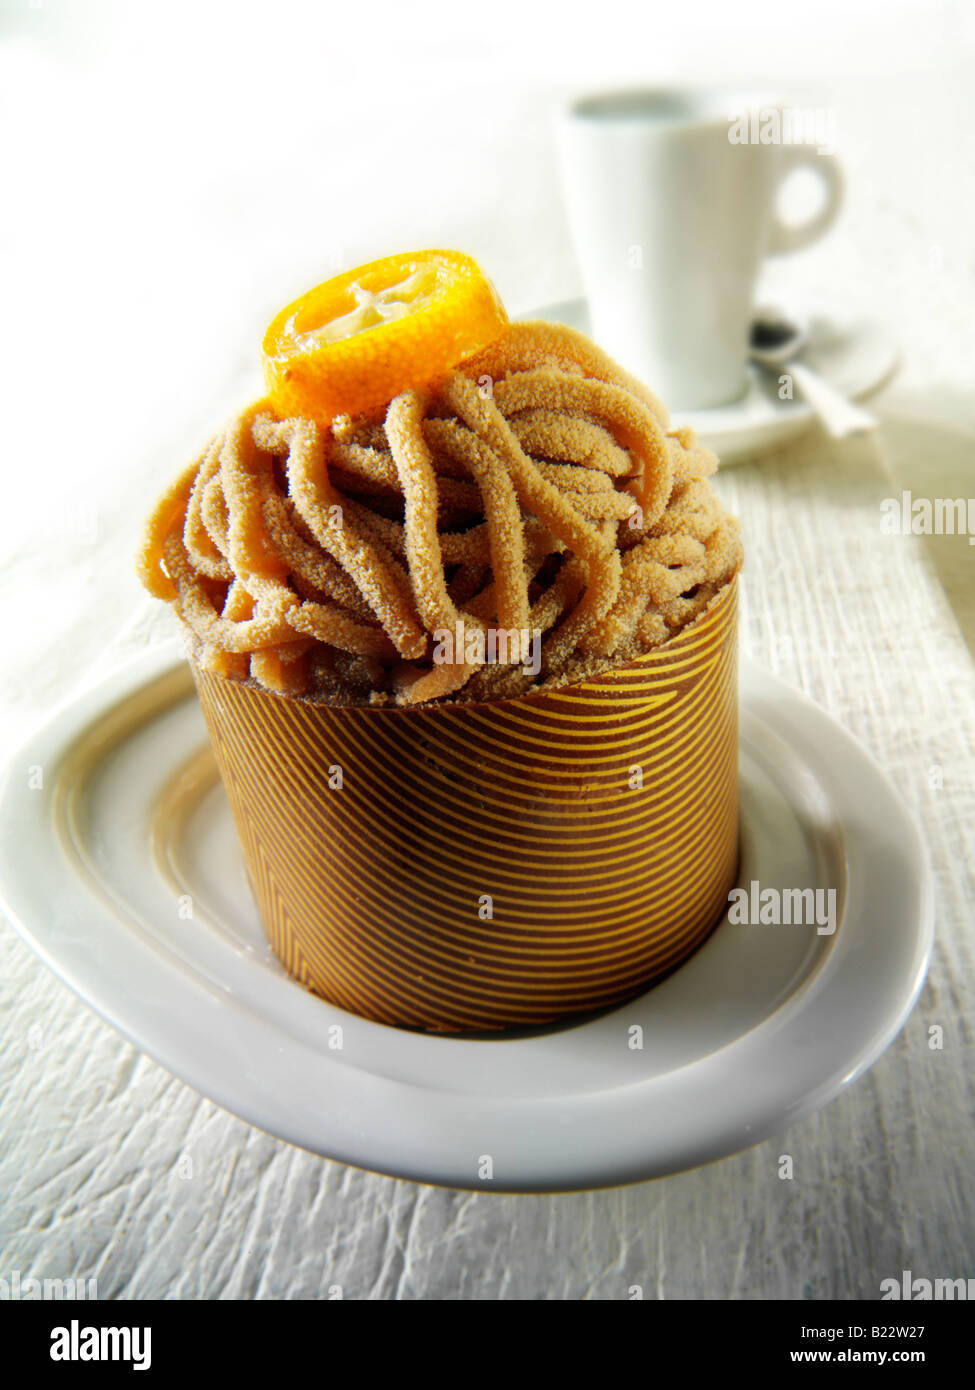 Chocolate shell filled with sponge and chestnut marron puree individual cake with a cup of coffee in a table setting Stock Photo